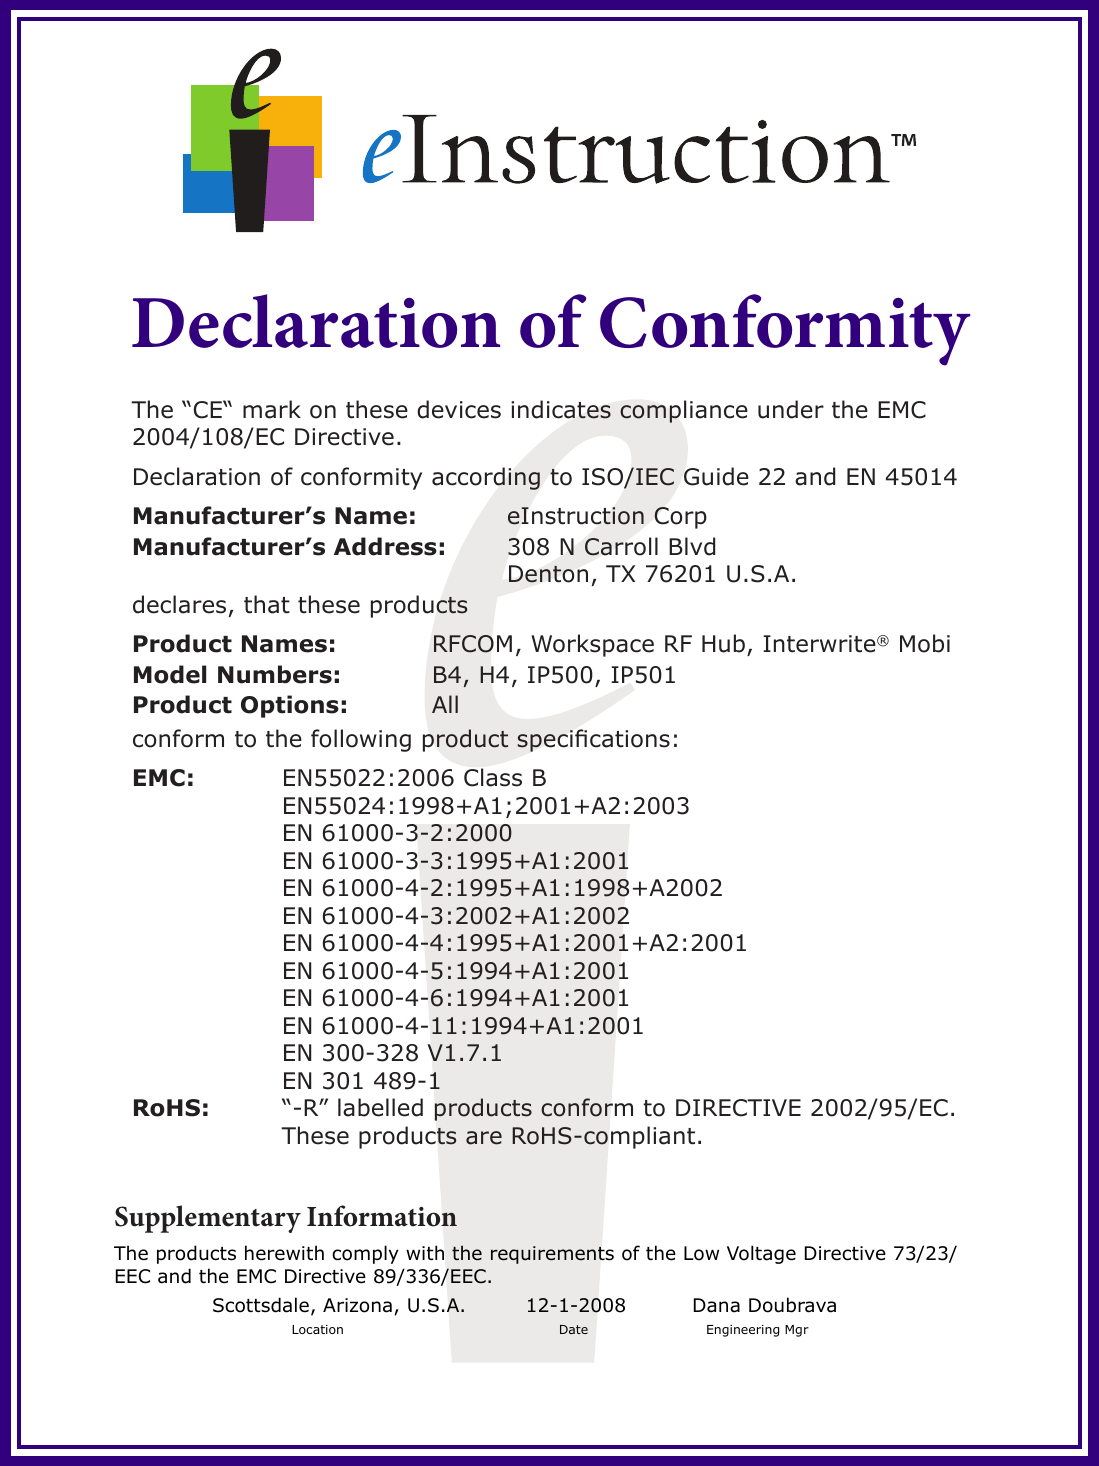 Declaration of ConformityThe “CE“ mark on these devices indicates compliance under the EMC 2004/108/EC Directive. Declaration of conformity according to ISO/IEC Guide 22 and EN 45014Manufacturer’s Name:    eInstruction CorpManufacturer’s Address:  308 N Carroll Blvd           Denton, TX 76201 U.S.A.declares, that these productsProduct Names:    RFCOM, Workspace RF Hub, Interwrite® Mobi Model Numbers:    B4, H4, IP500, IP501 Product Options:   Allconform to the following product specications:EMC:    EN55022:2006 Class B    EN55024:1998+A1;2001+A2:2003    EN 61000-3-2:2000    EN 61000-3-3:1995+A1:2001    EN 61000-4-2:1995+A1:1998+A2002    EN 61000-4-3:2002+A1:2002    EN 61000-4-4:1995+A1:2001+A2:2001    EN 61000-4-5:1994+A1:2001    EN 61000-4-6:1994+A1:2001    EN 61000-4-11:1994+A1:2001    EN 300-328 V1.7.1    EN 301 489-1  RoHS:    “-R” labelled products conform to DIRECTIVE 2002/95/EC.     These products are RoHS-compliant.Supplementary InformationThe products herewith comply with the requirements of the Low Voltage Directive 73/23/EEC and the EMC Directive 89/336/EEC.Scottsdale, Arizona, U.S.A.         12-1-2008          Dana Doubrava Location                    Date              Engineering Mgr